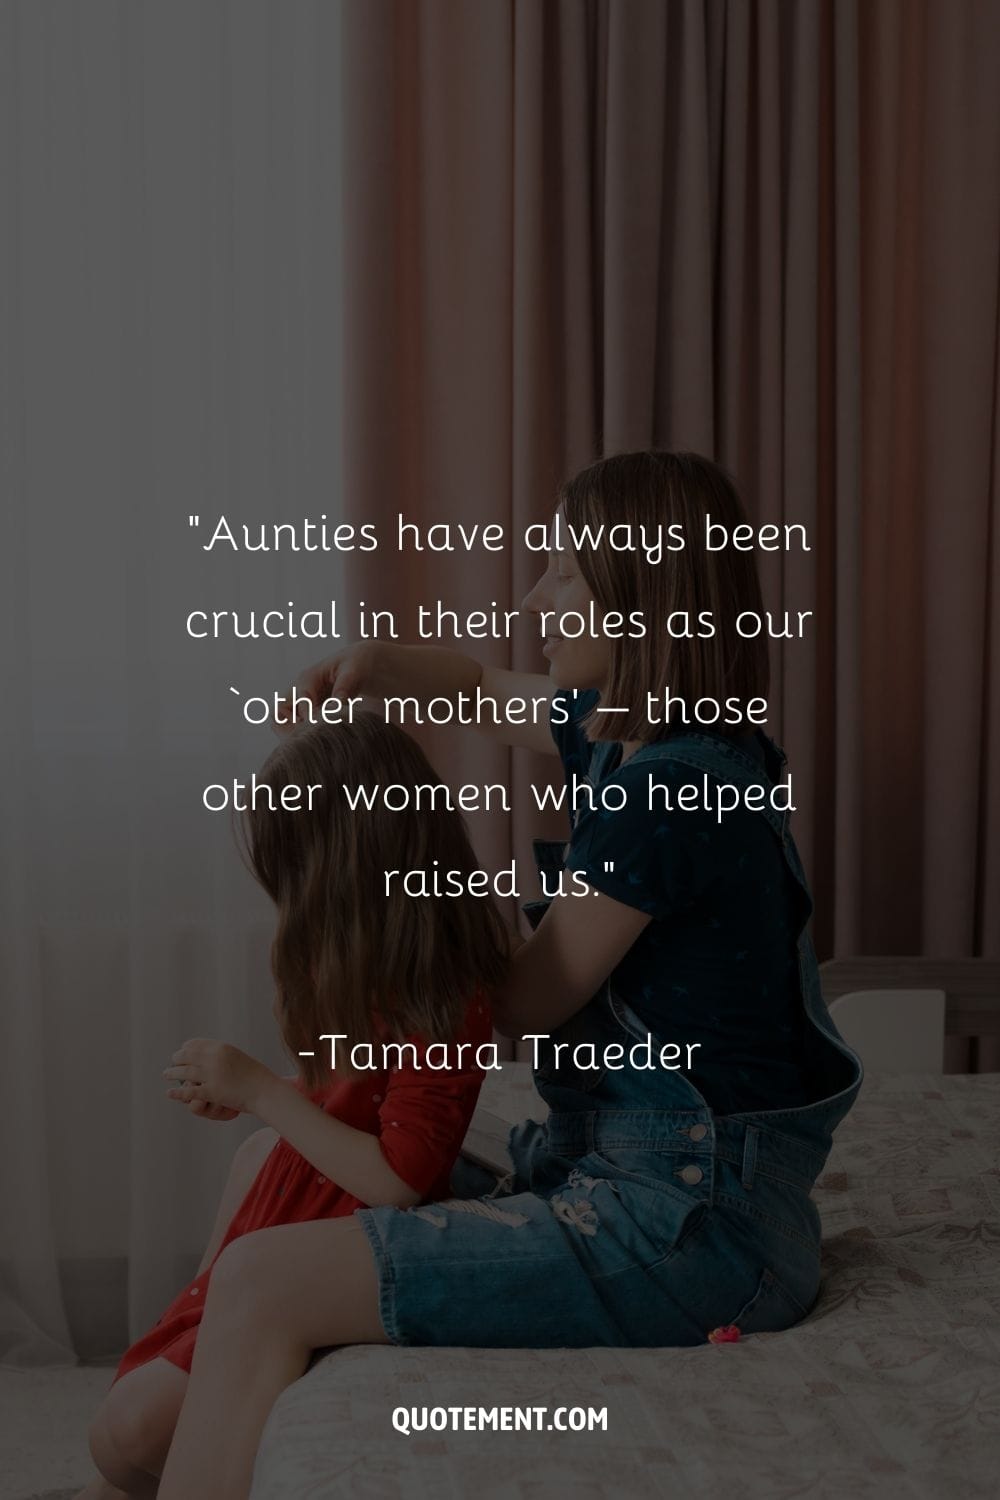 Image of aunt and niece representing a quote about aunts.